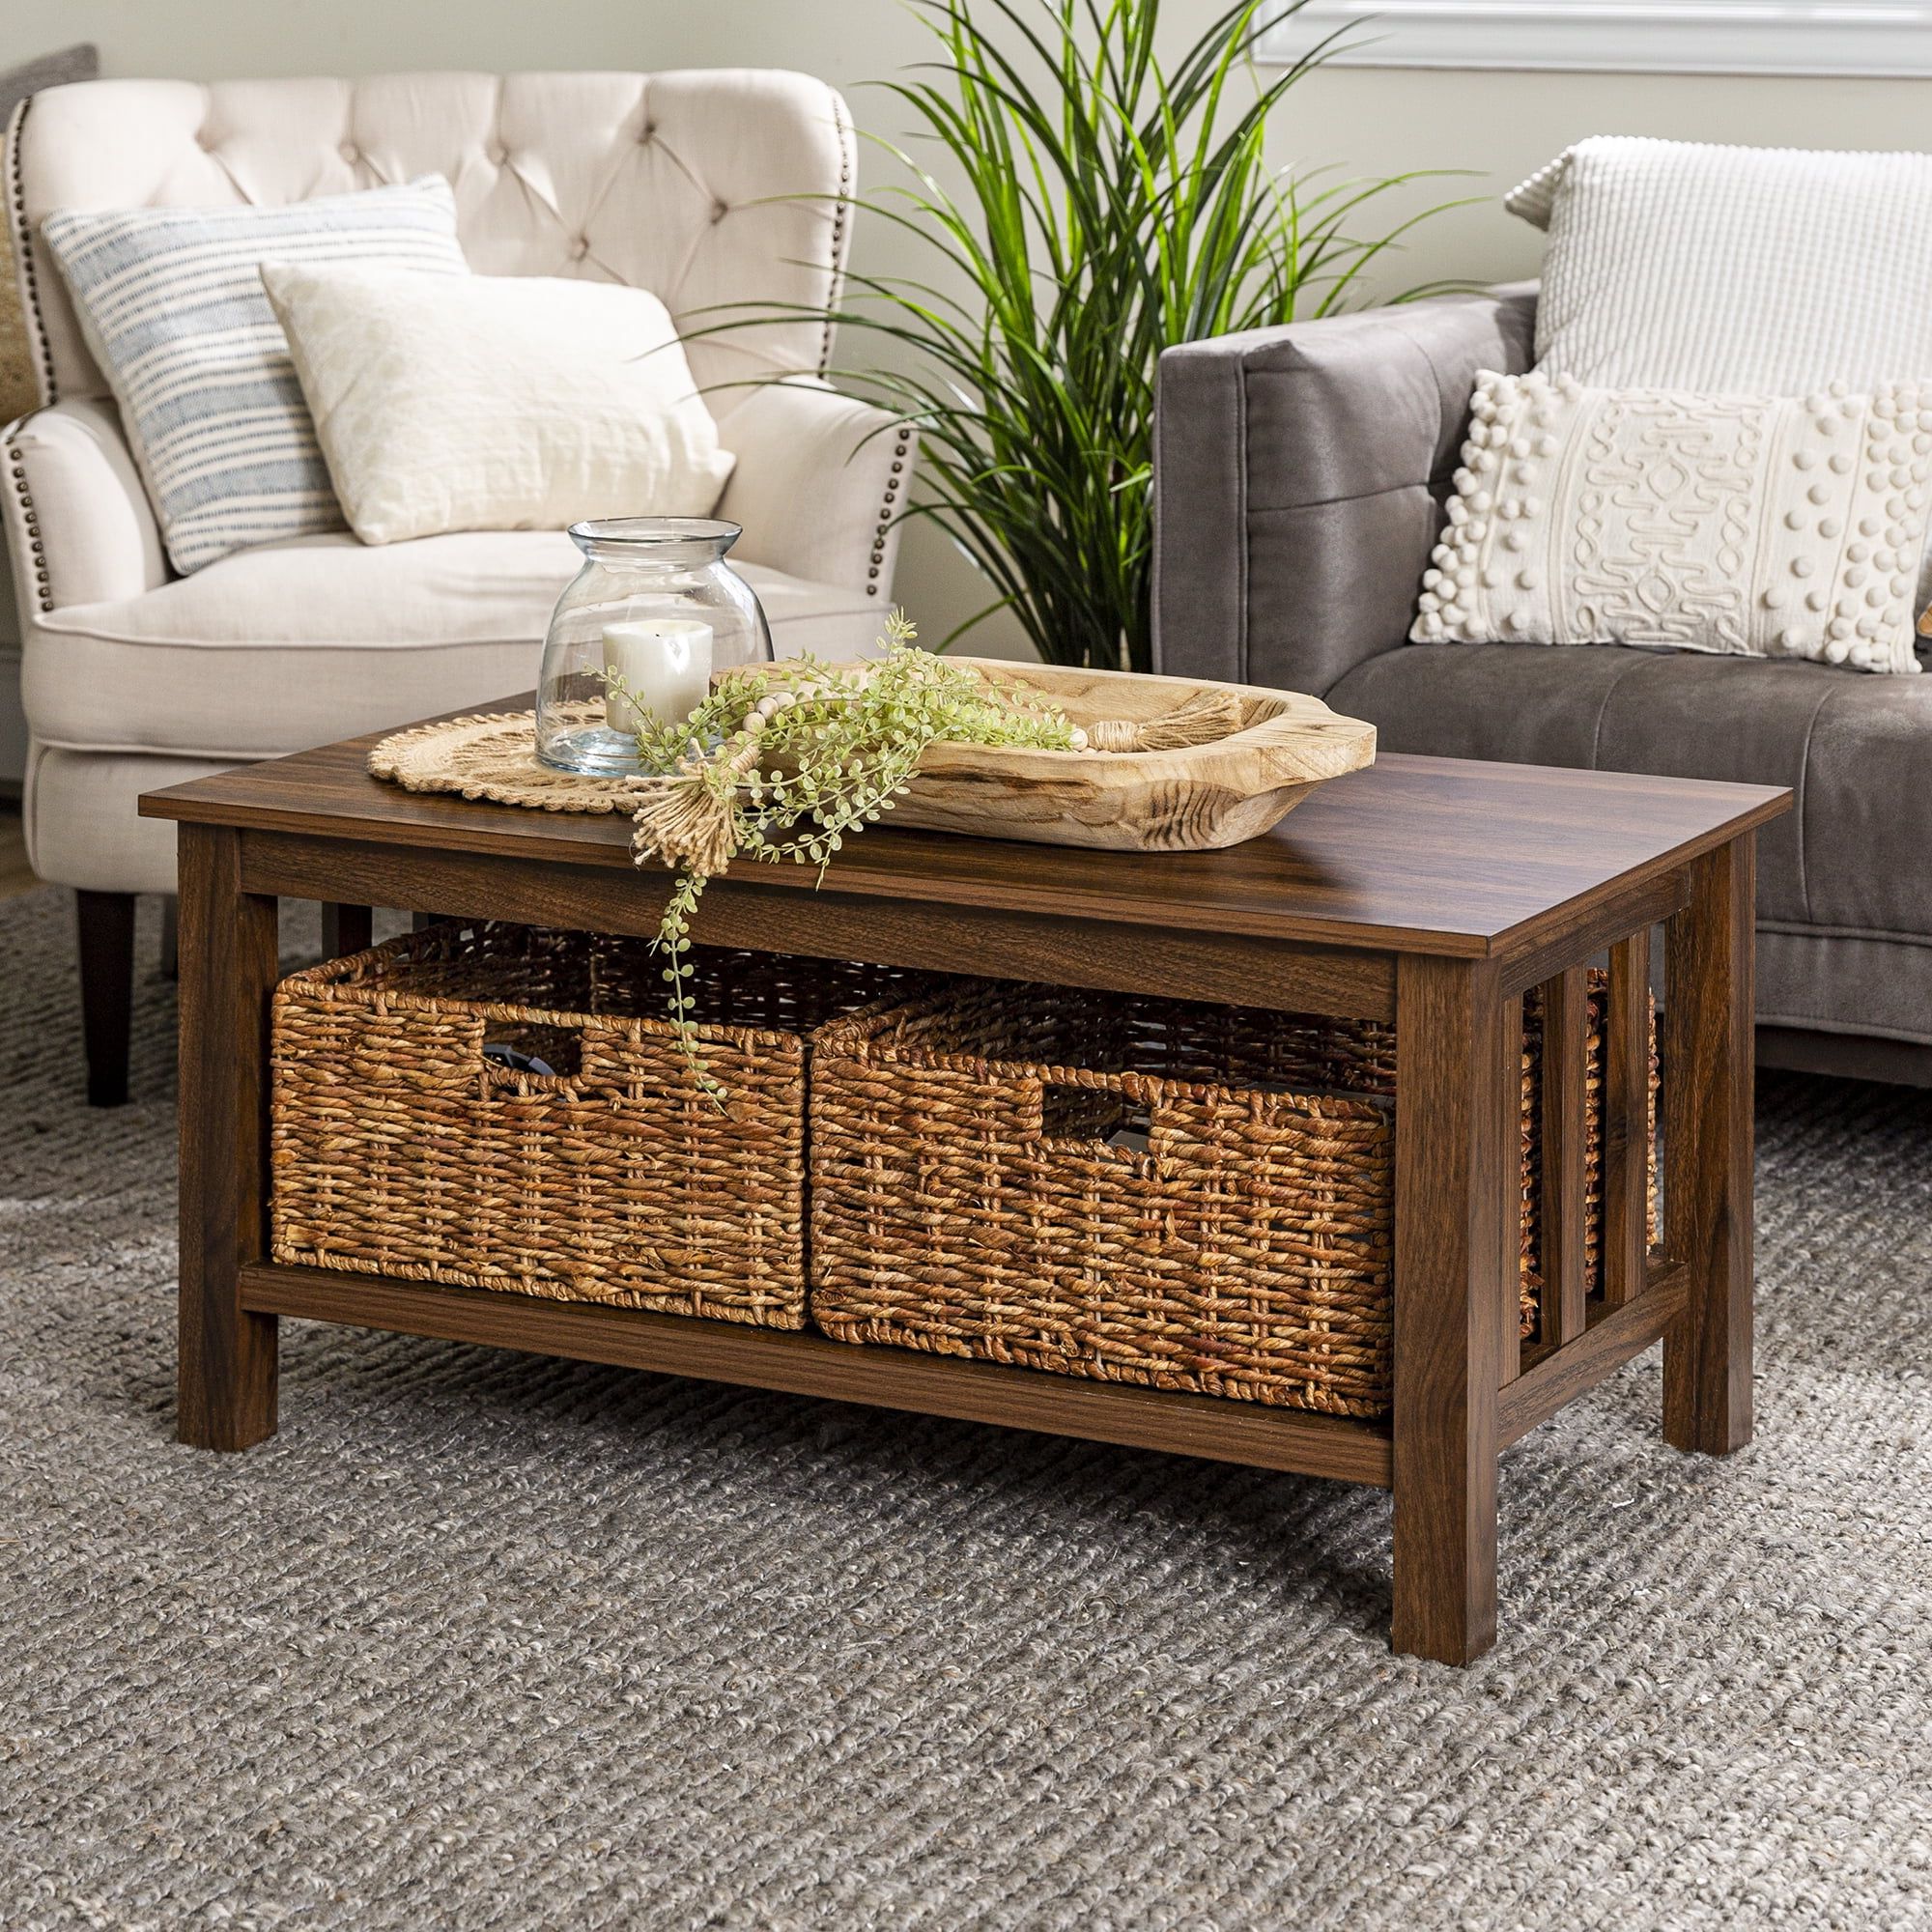 Woven Paths Traditional Storage Coffee Table With Bins, Dark Walnut Intended For Woven Paths Coffee Tables (Gallery 2 of 20)